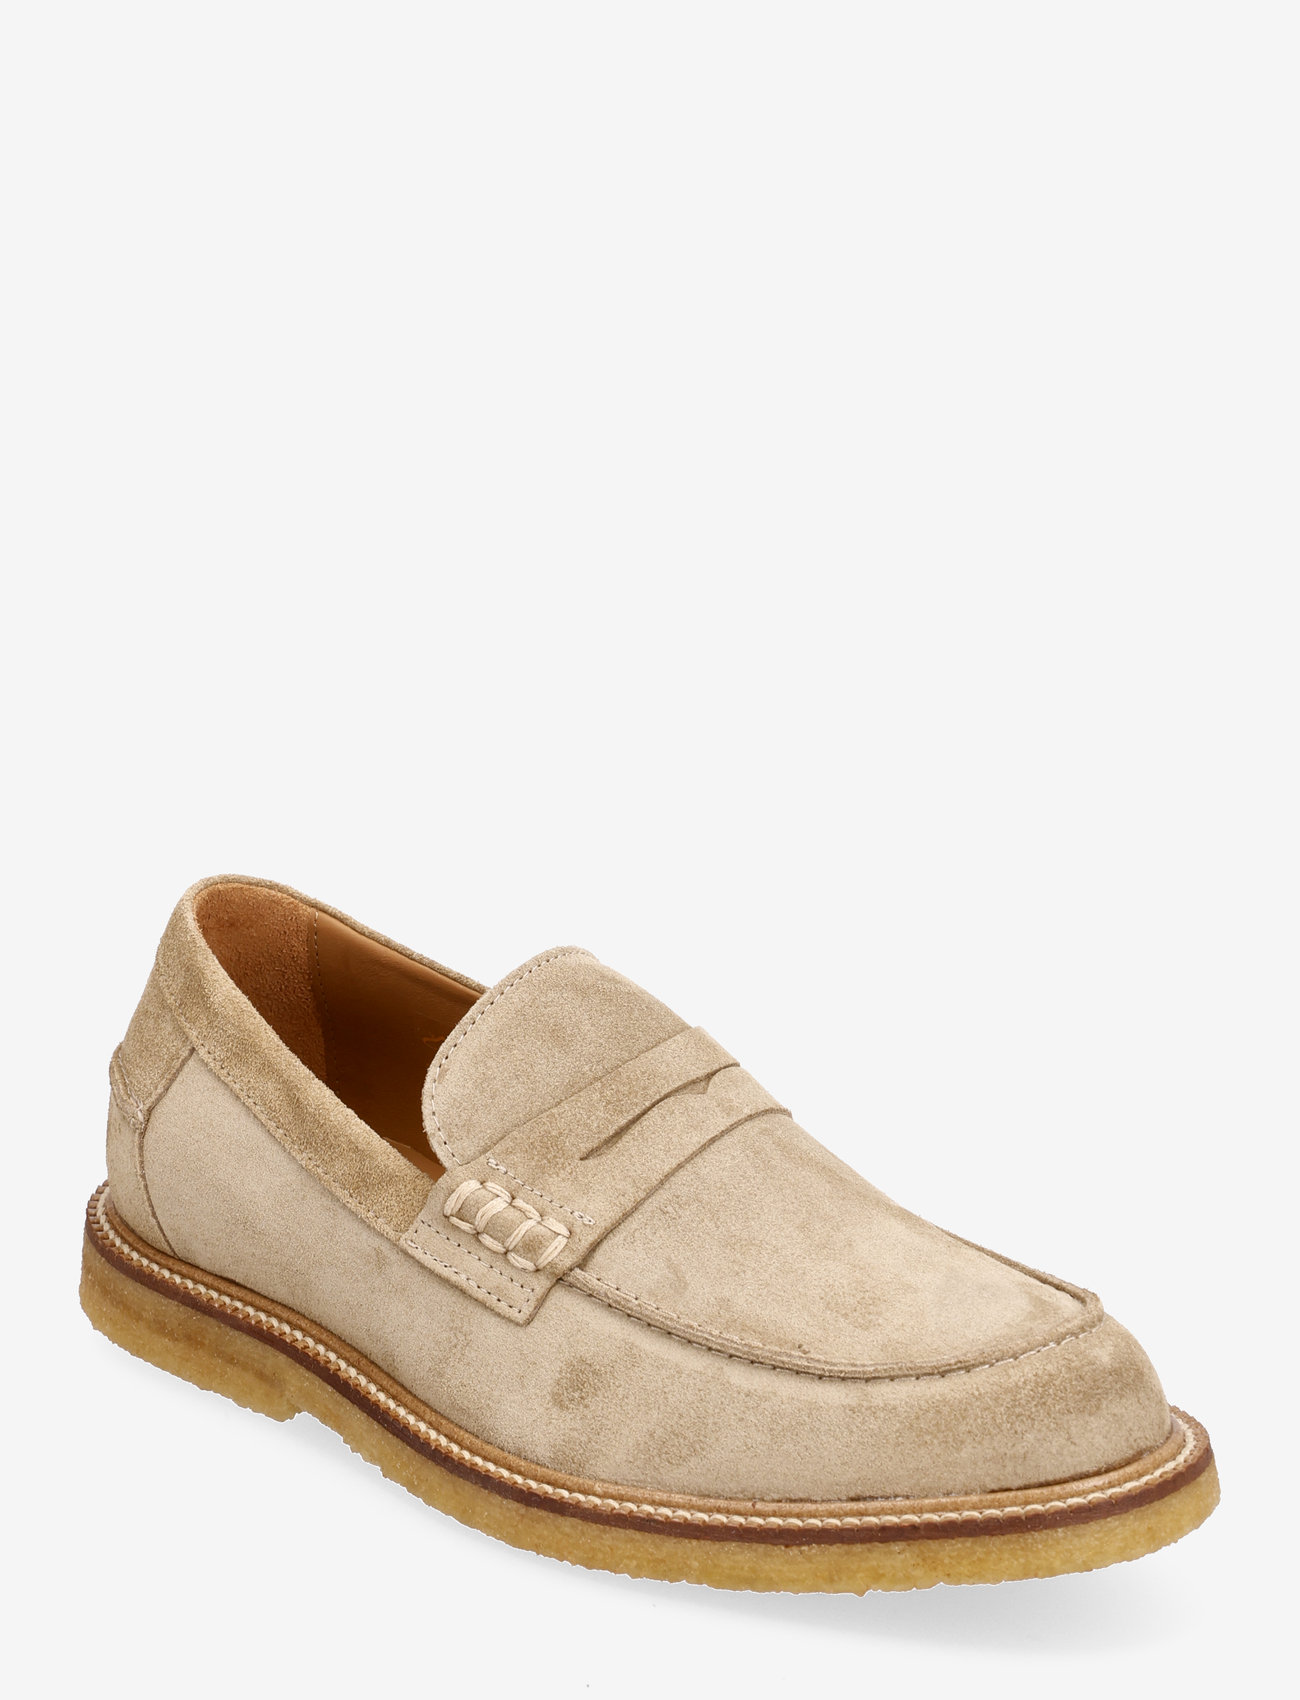 ANGULUS - Loafer - nordic style - 2217 sand - 0